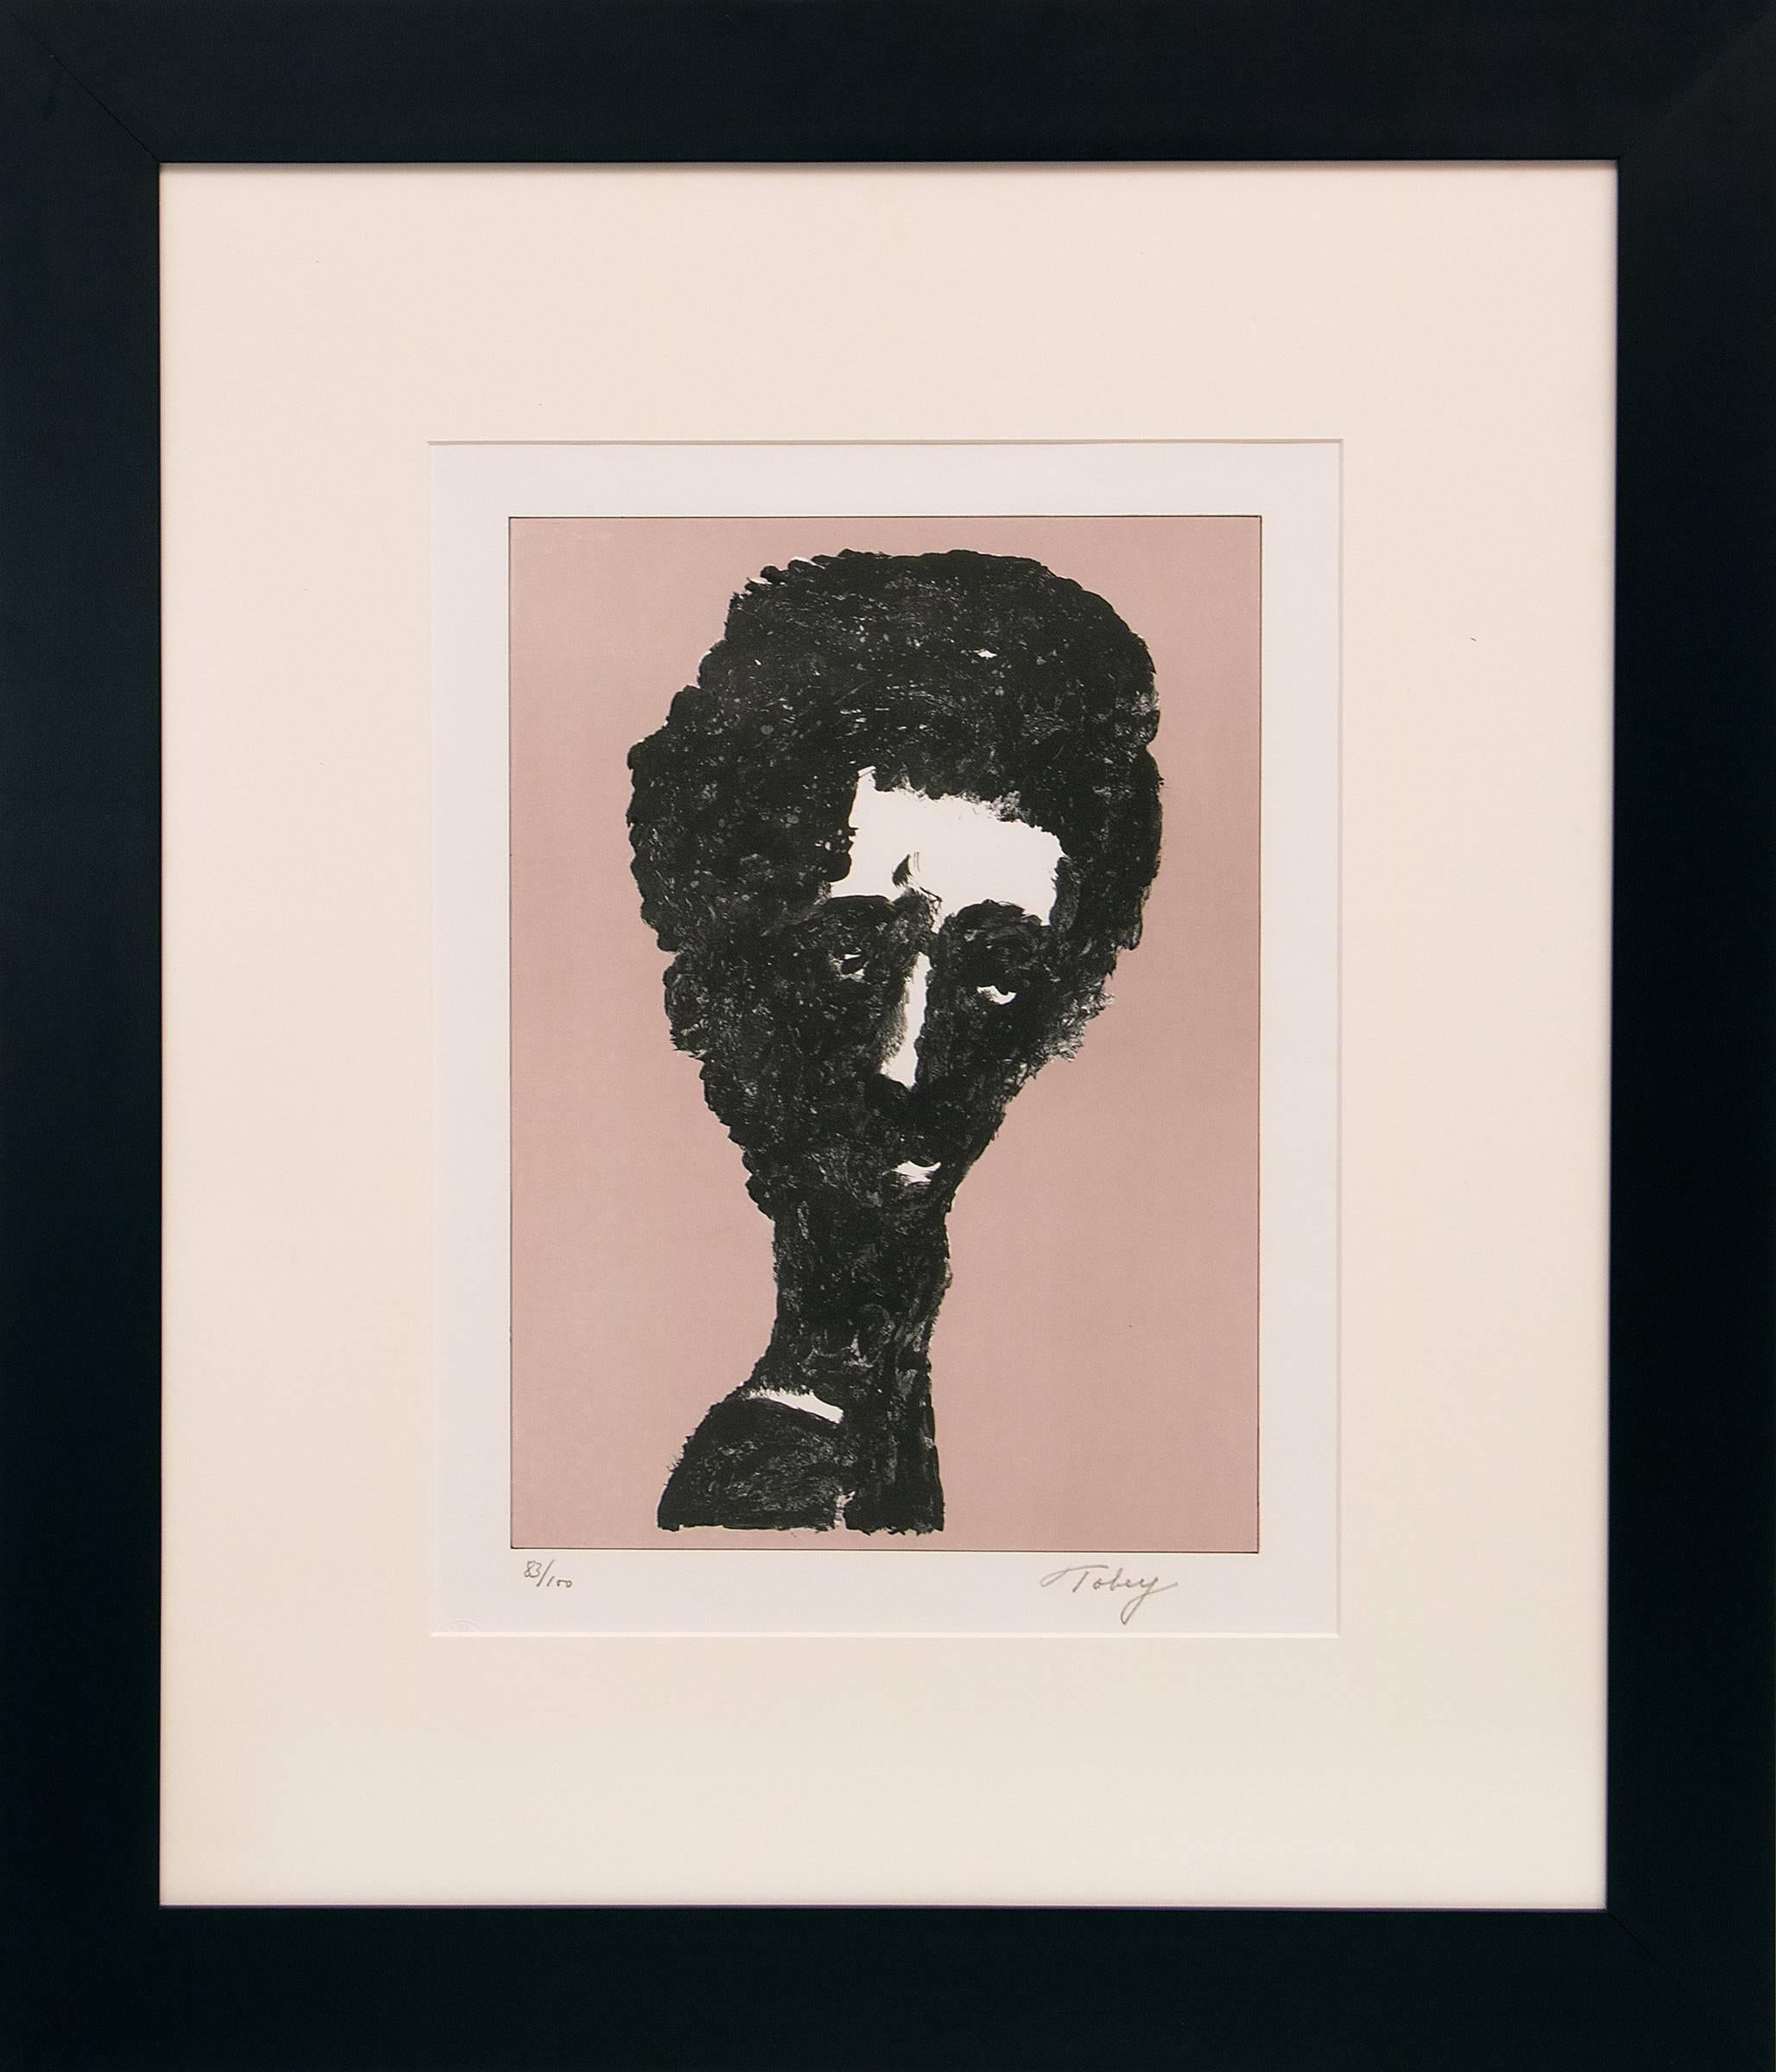 Mark Tobey Portrait Print - Head of a Man, Portrait by Mark Toby; Signed Lithograph 83/100, Pink Black White